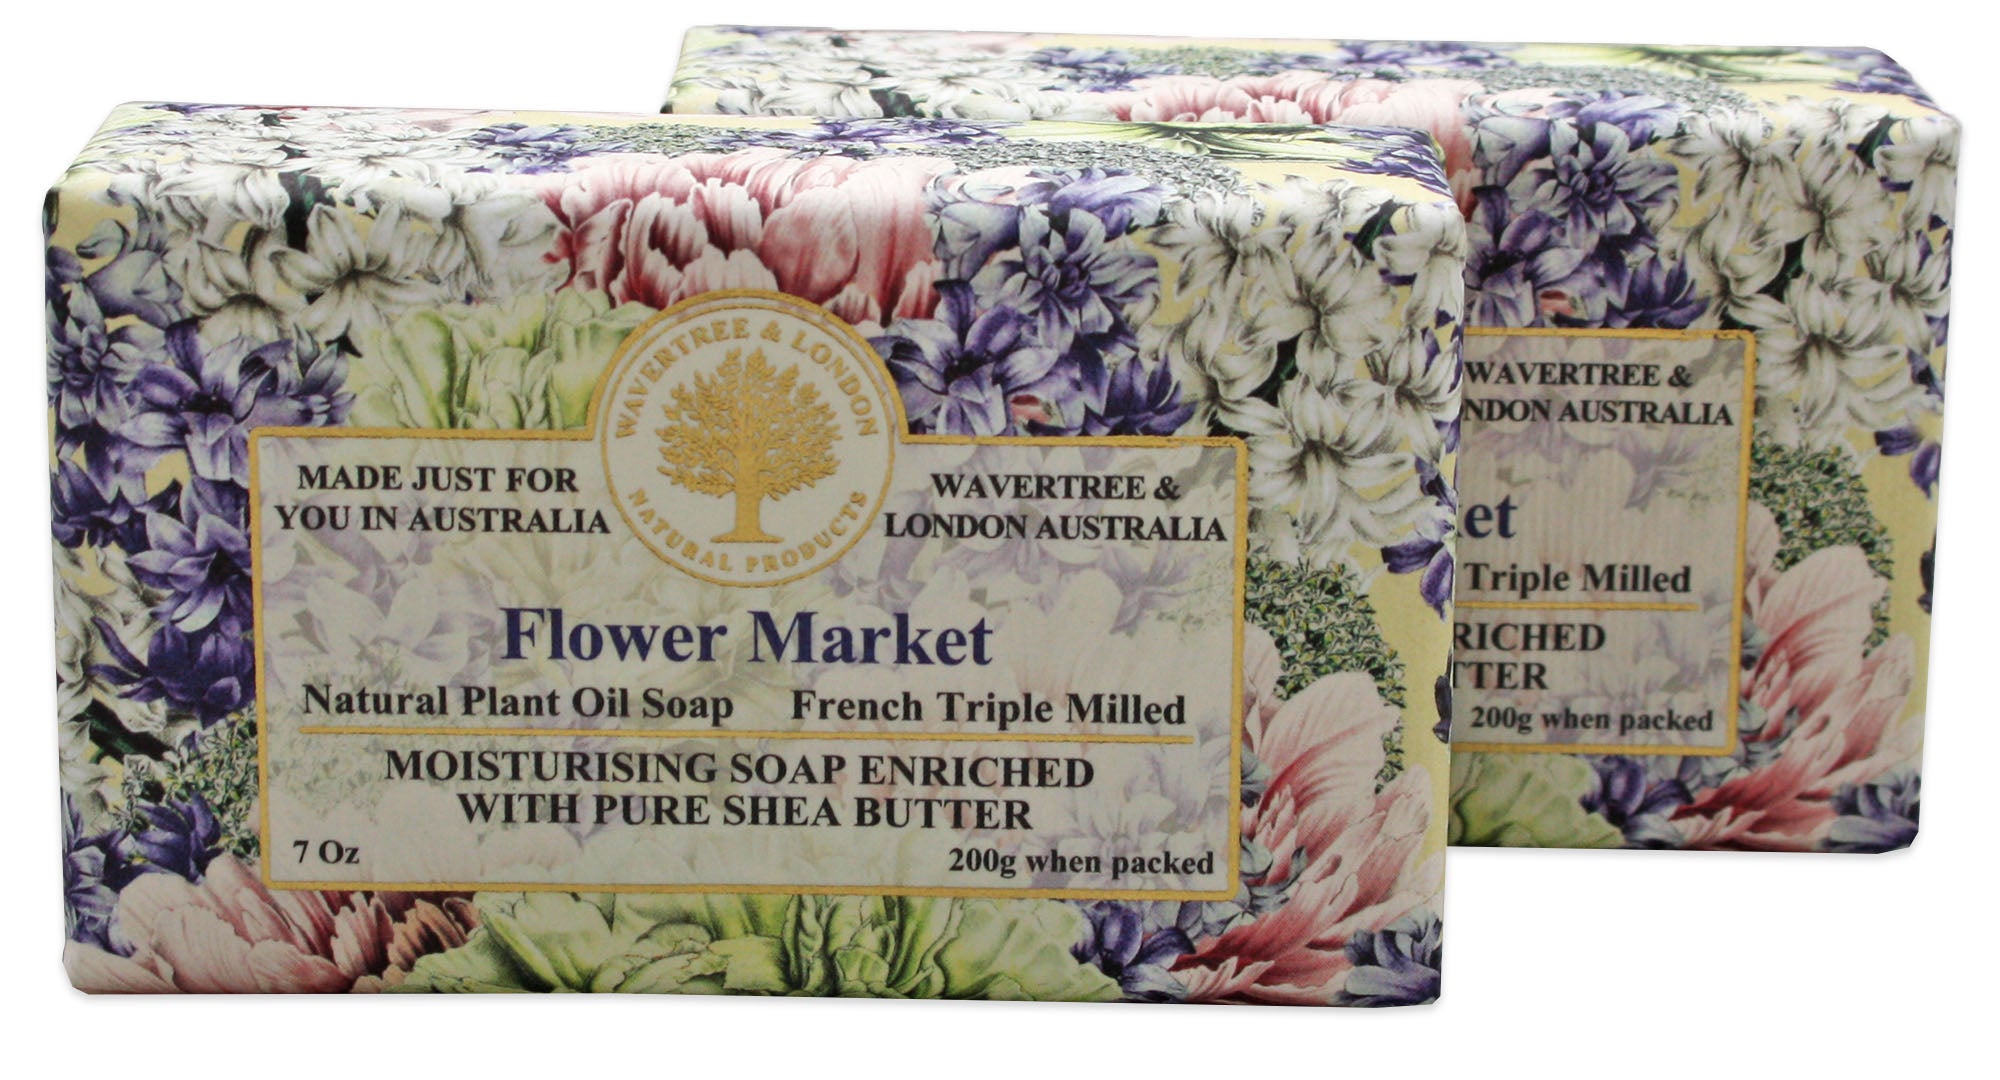 Wavertree & London Flower Market (2 Bars), 7oz Moisturizing Natural Soap Bar, French -Milled and enriched with Shea Butter